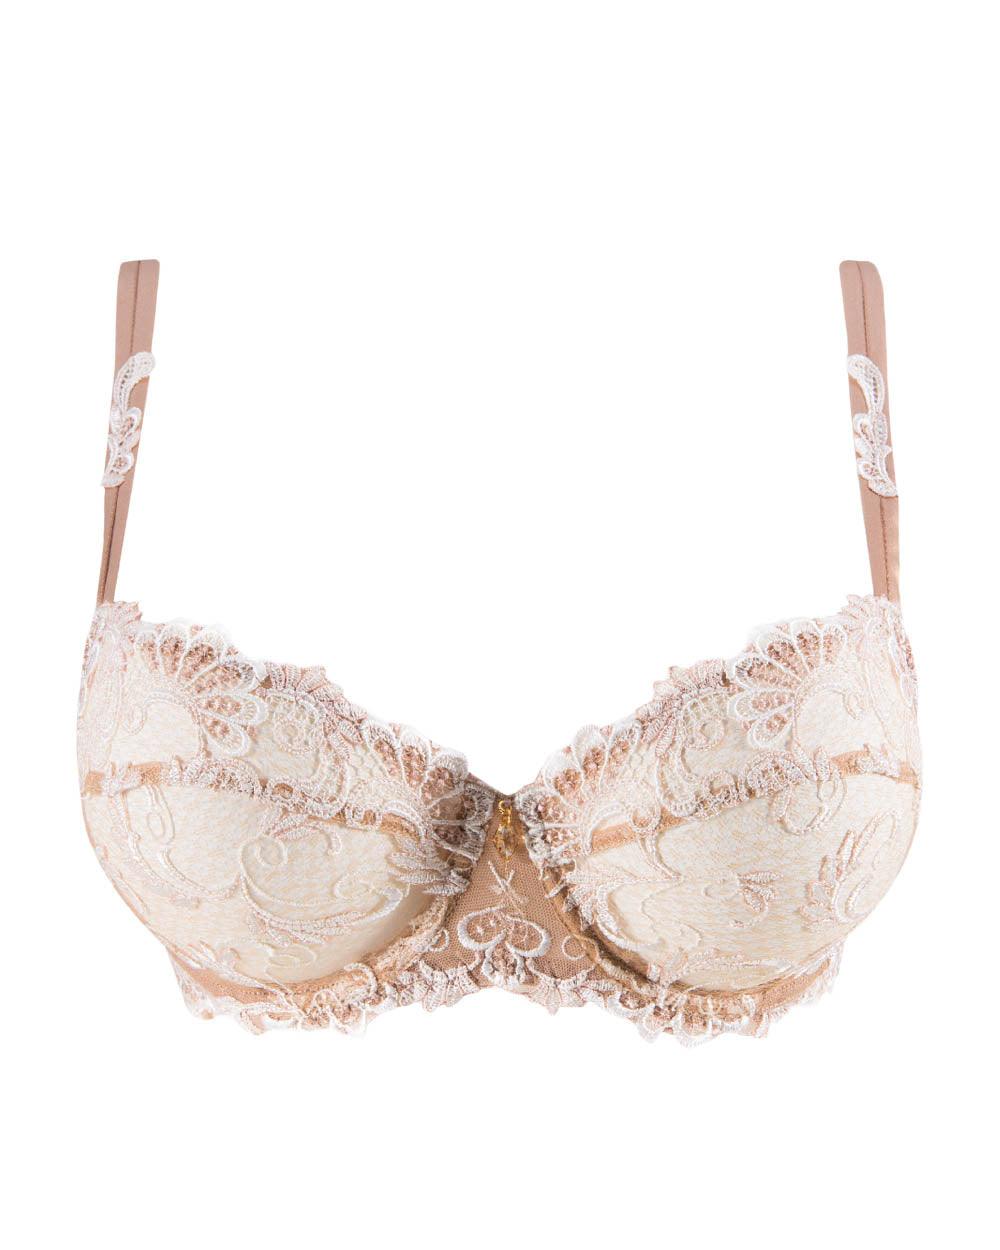 Wedding Day Bra Made With Silk Satin & Tulle the Esme Balcony Bra Has Demi  Cups in Sheer Floral French Leavers Lace Made to Order Ivory -  Canada